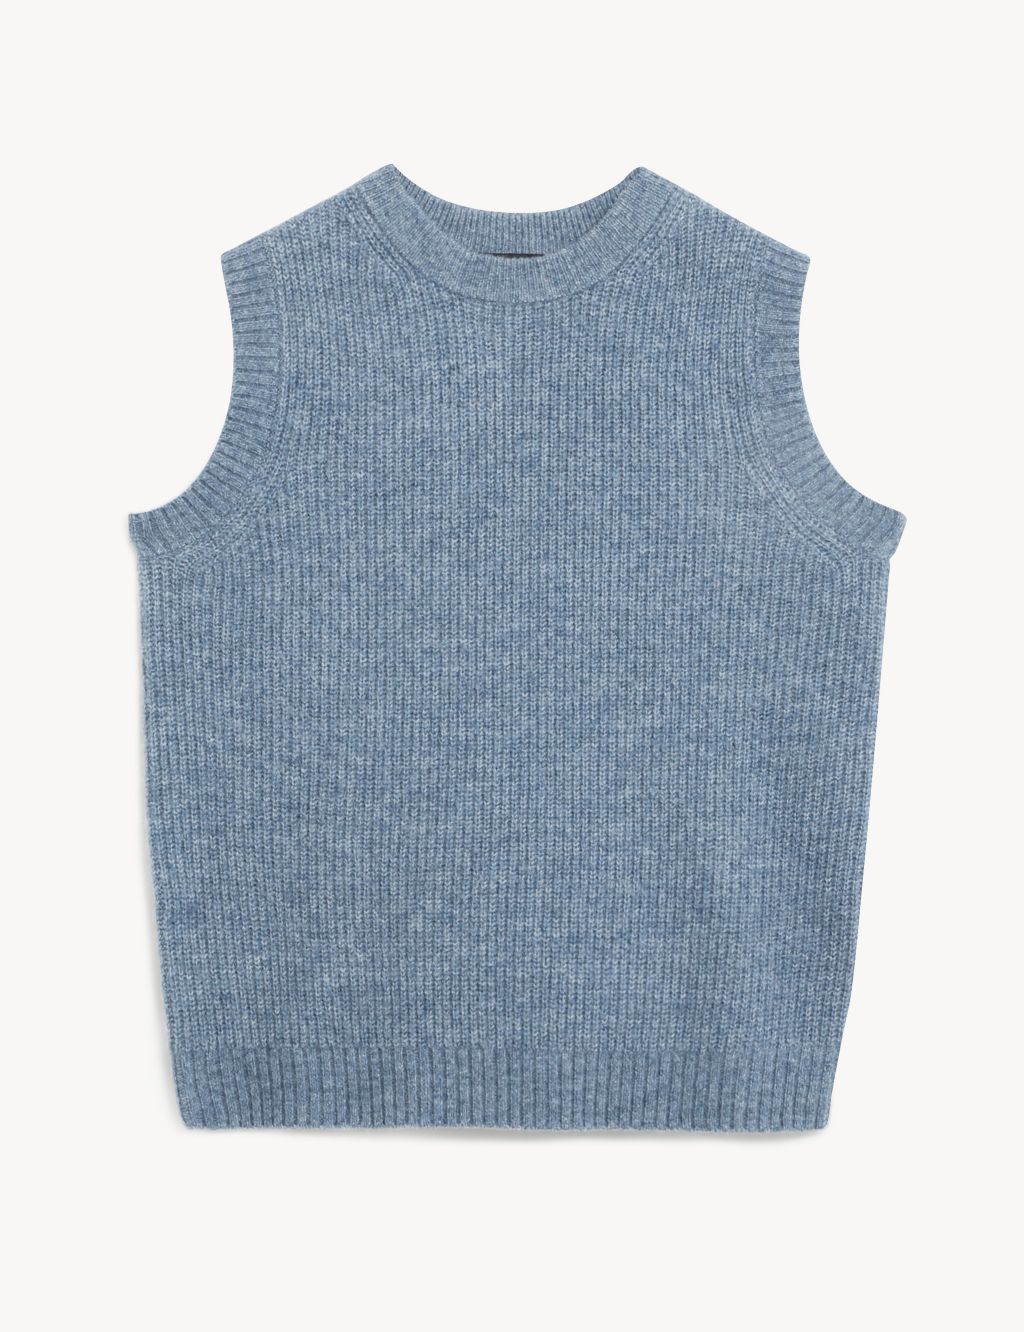 Crew Neck Knitted Vest | M&S Collection | M&S